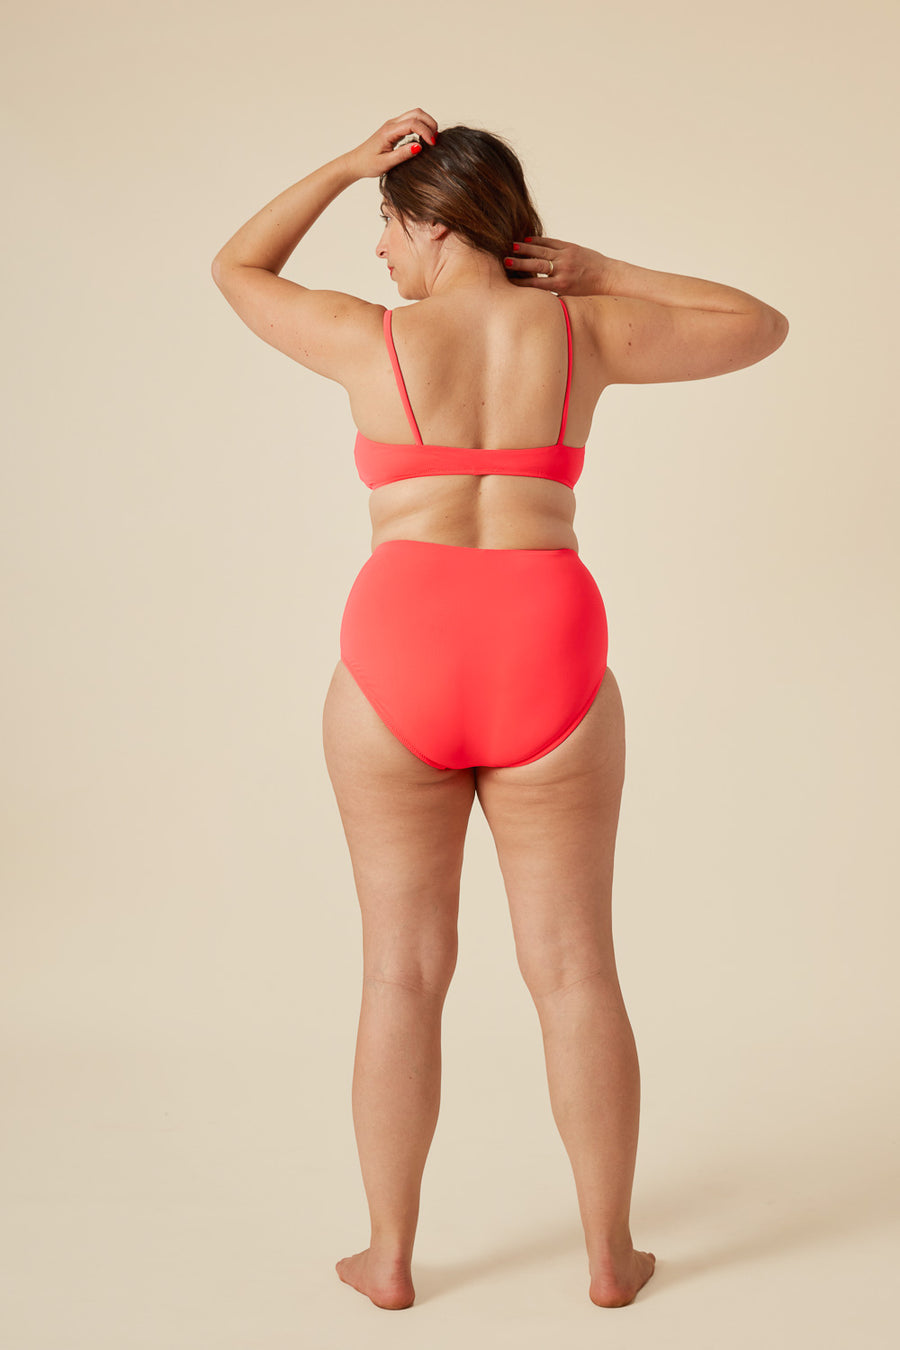 Swimwear Basics: Everything you need to know about sewing your own